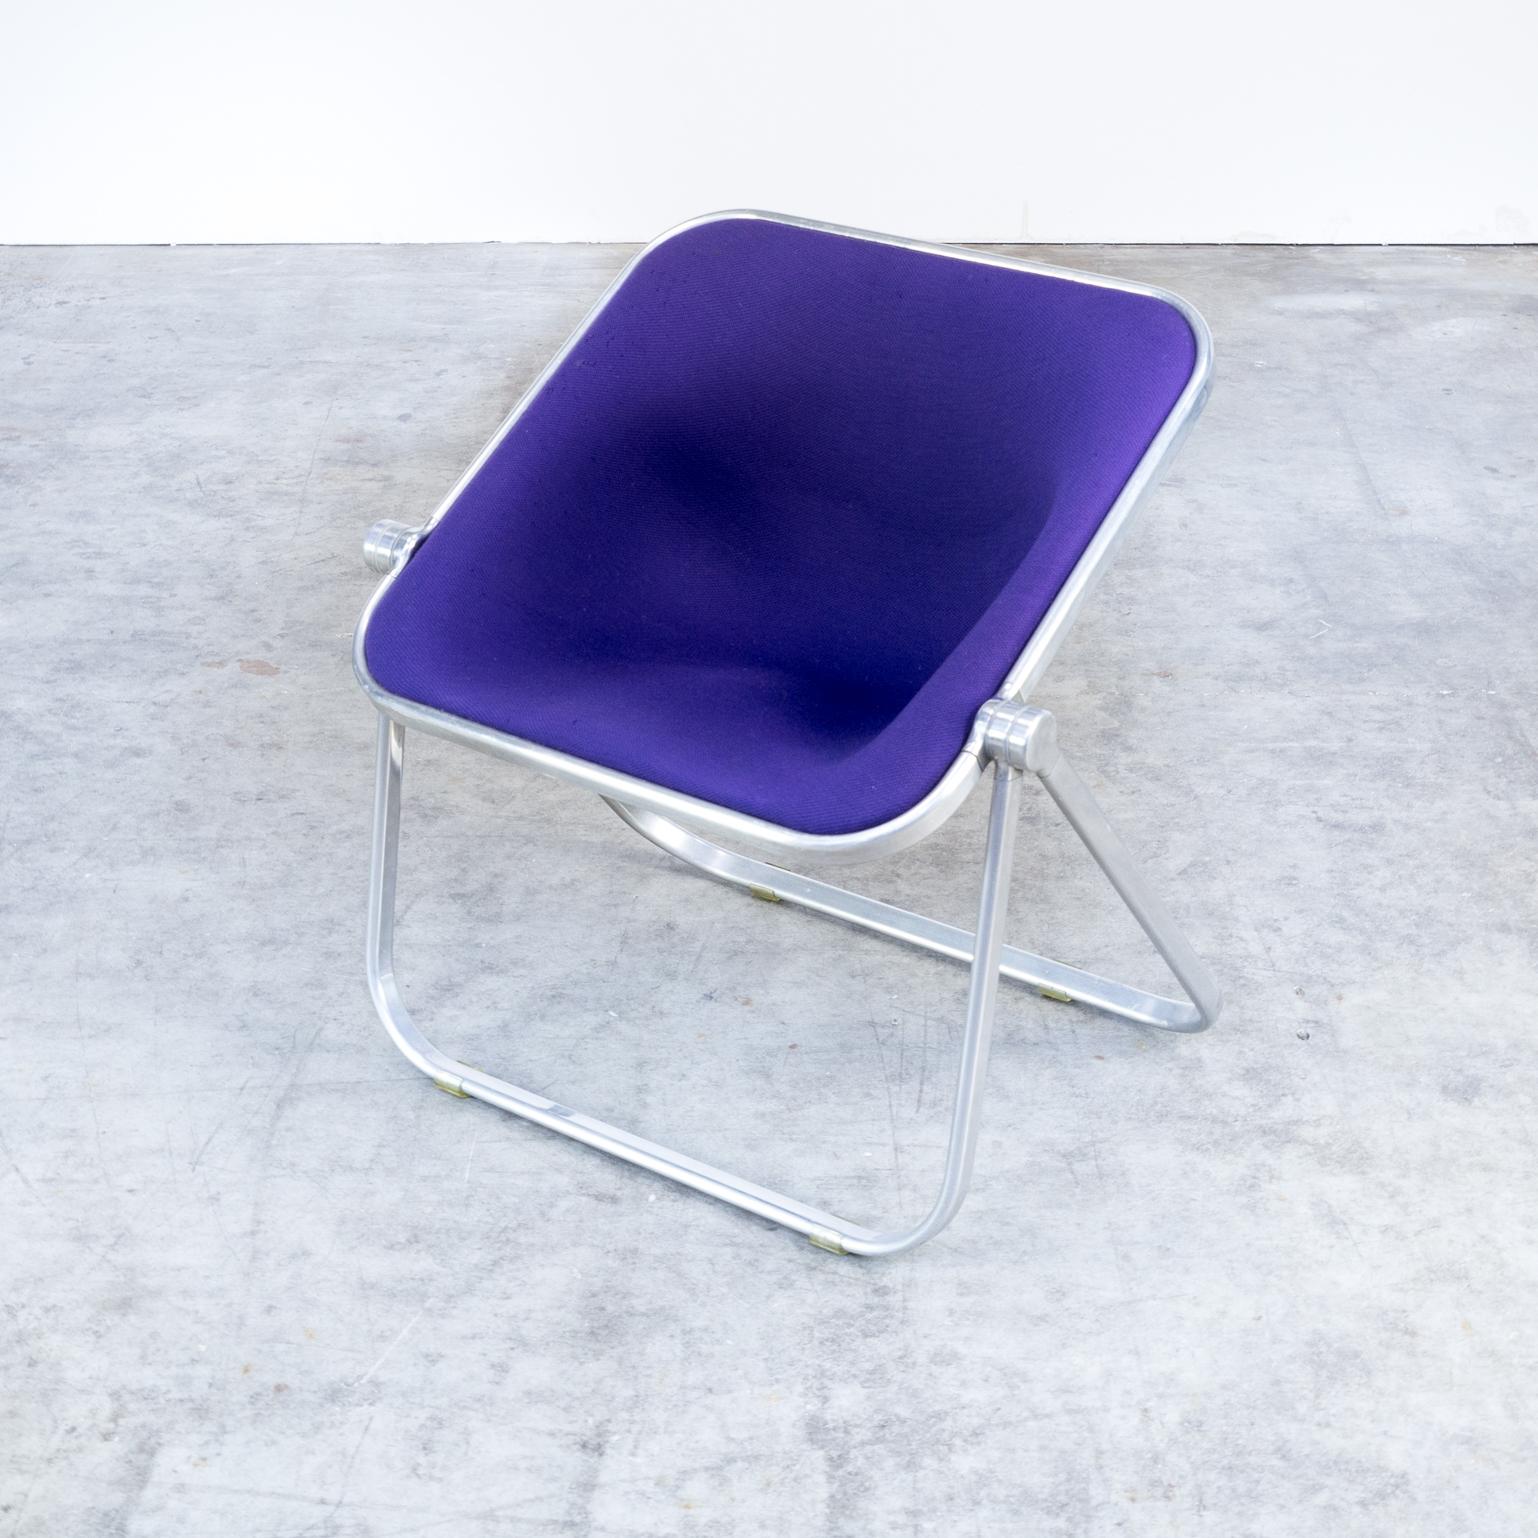 1970s Giancarlo Piretti ‘Plona’ Folding Chair for Castelli In Good Condition For Sale In Amstelveen, Noord